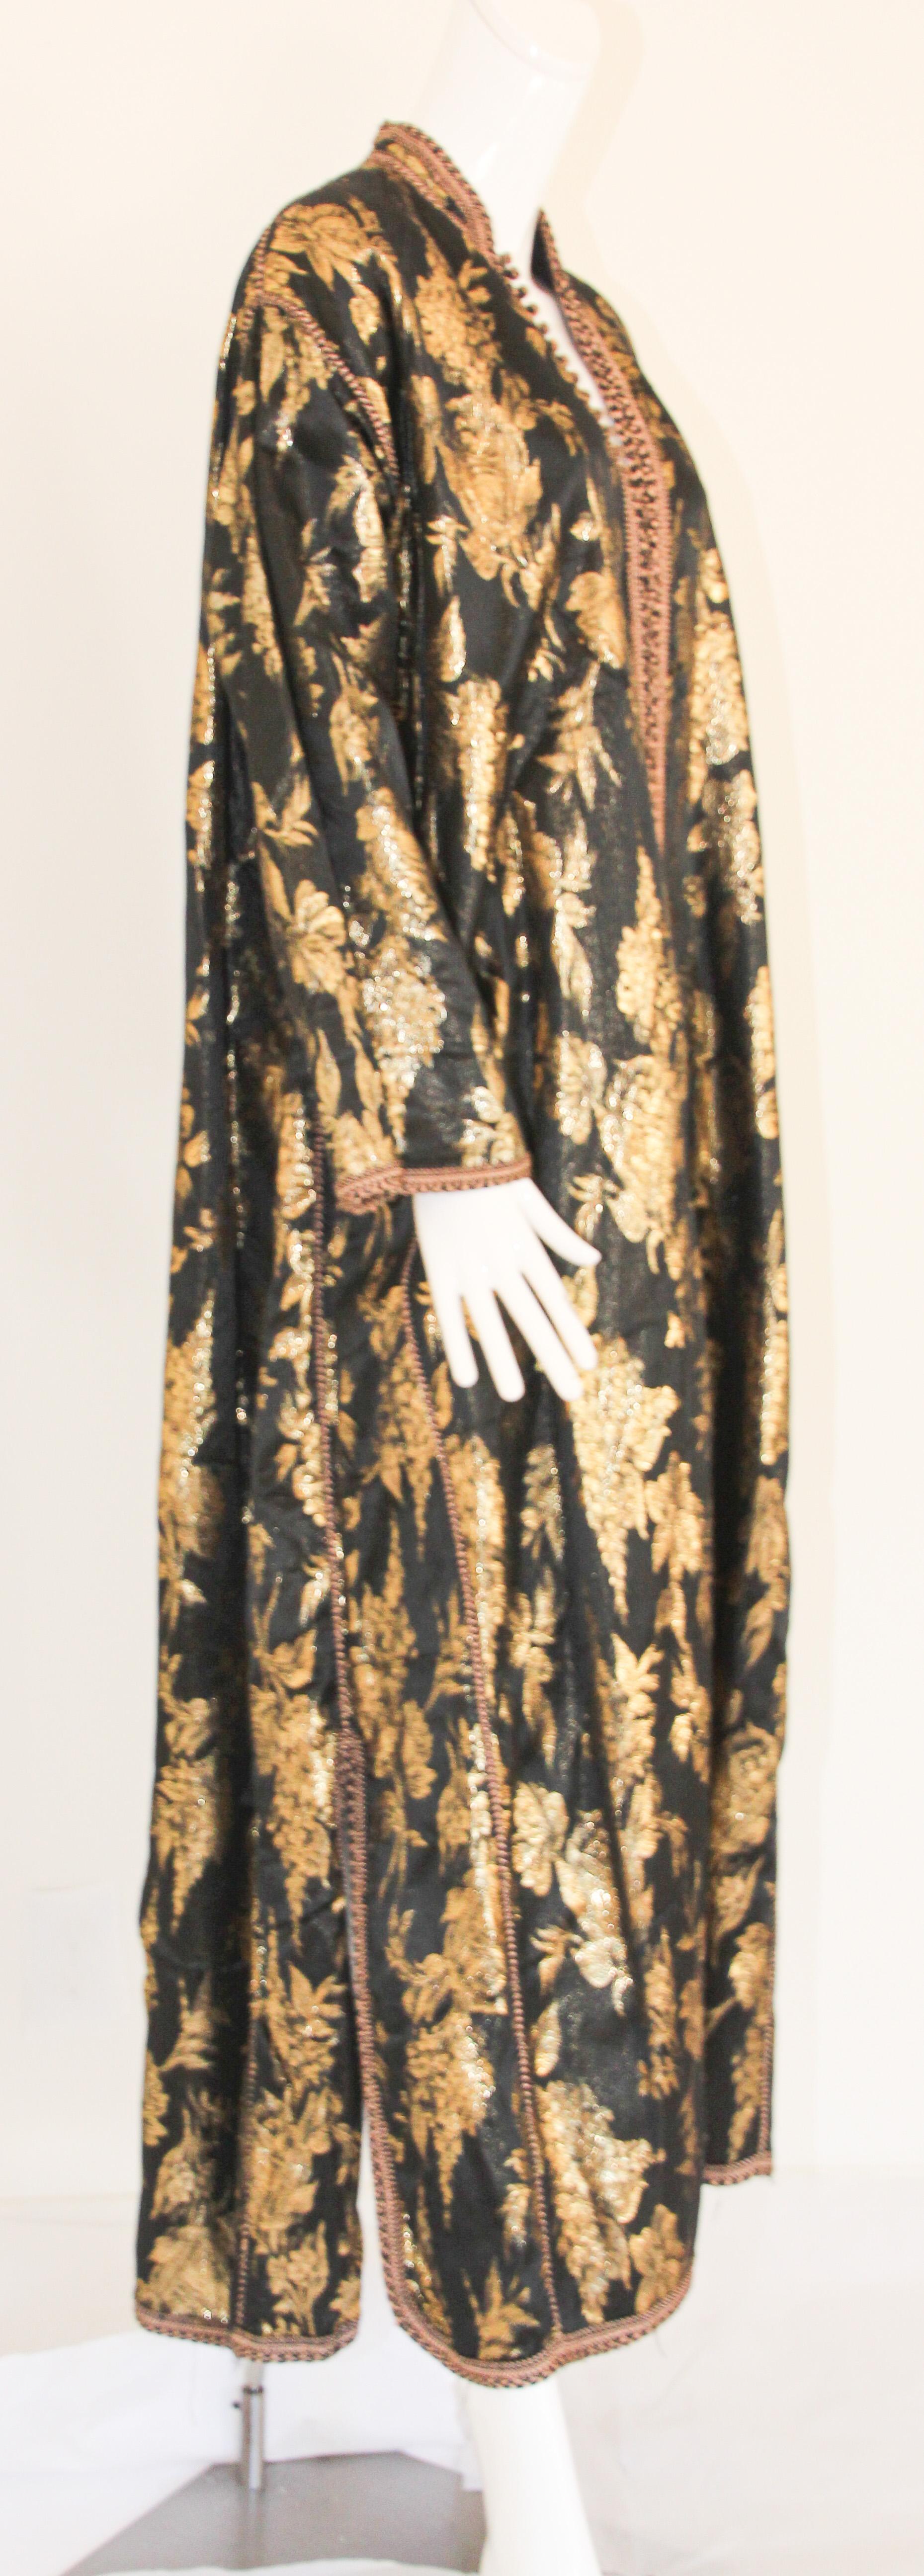 Vintage Moroccan Caftan, Black and Gold Embroidered, ca. 1960s For Sale 7